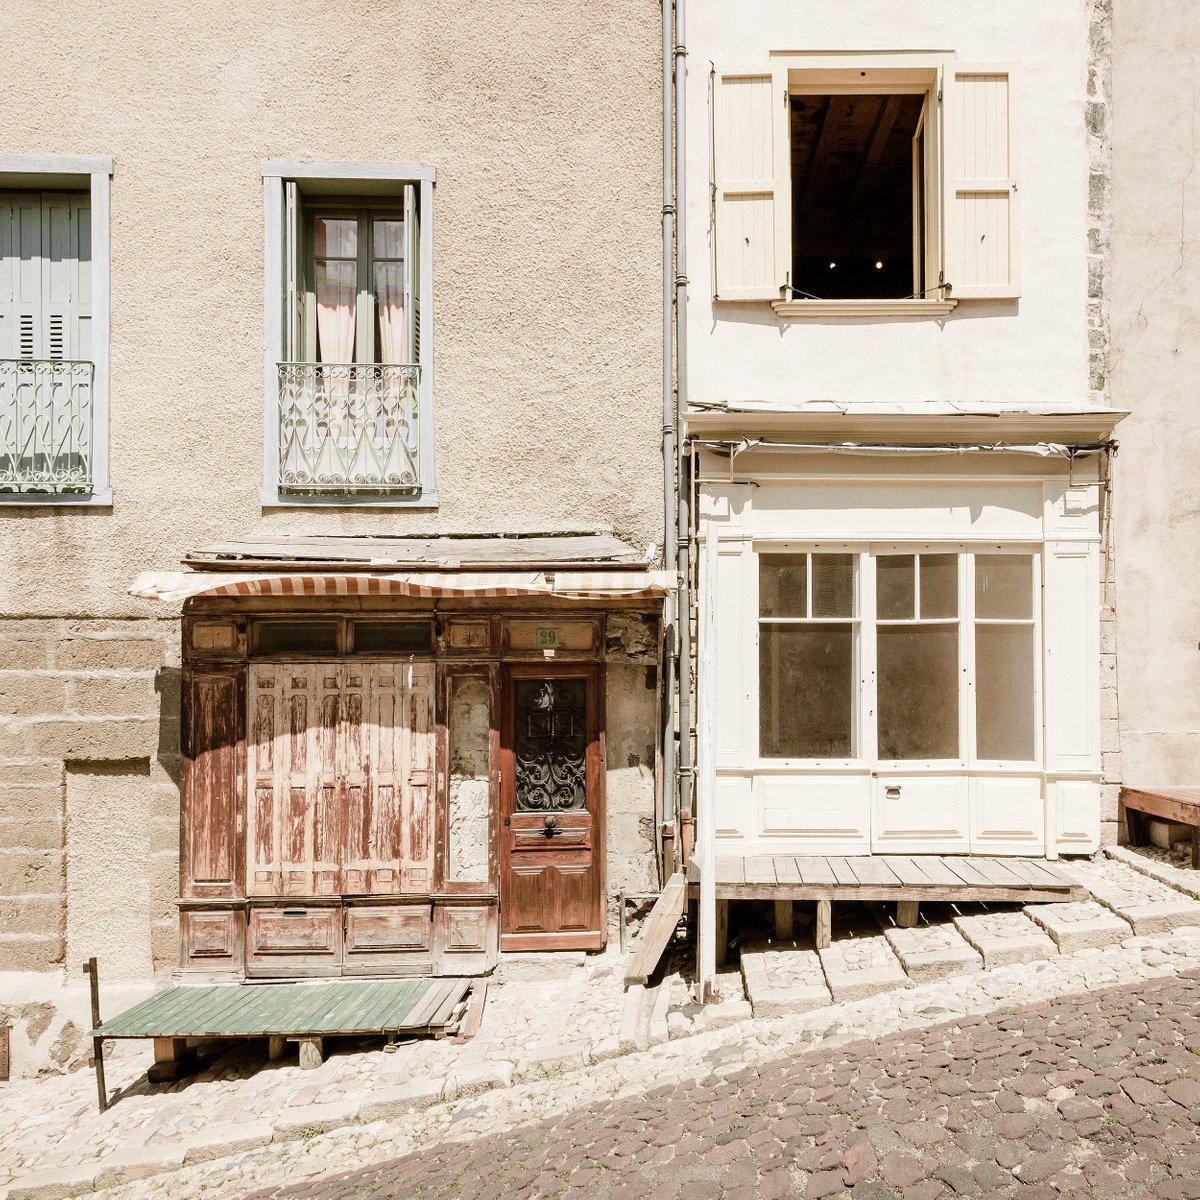 Shabby Chic in South of France I by Tom Hanslien